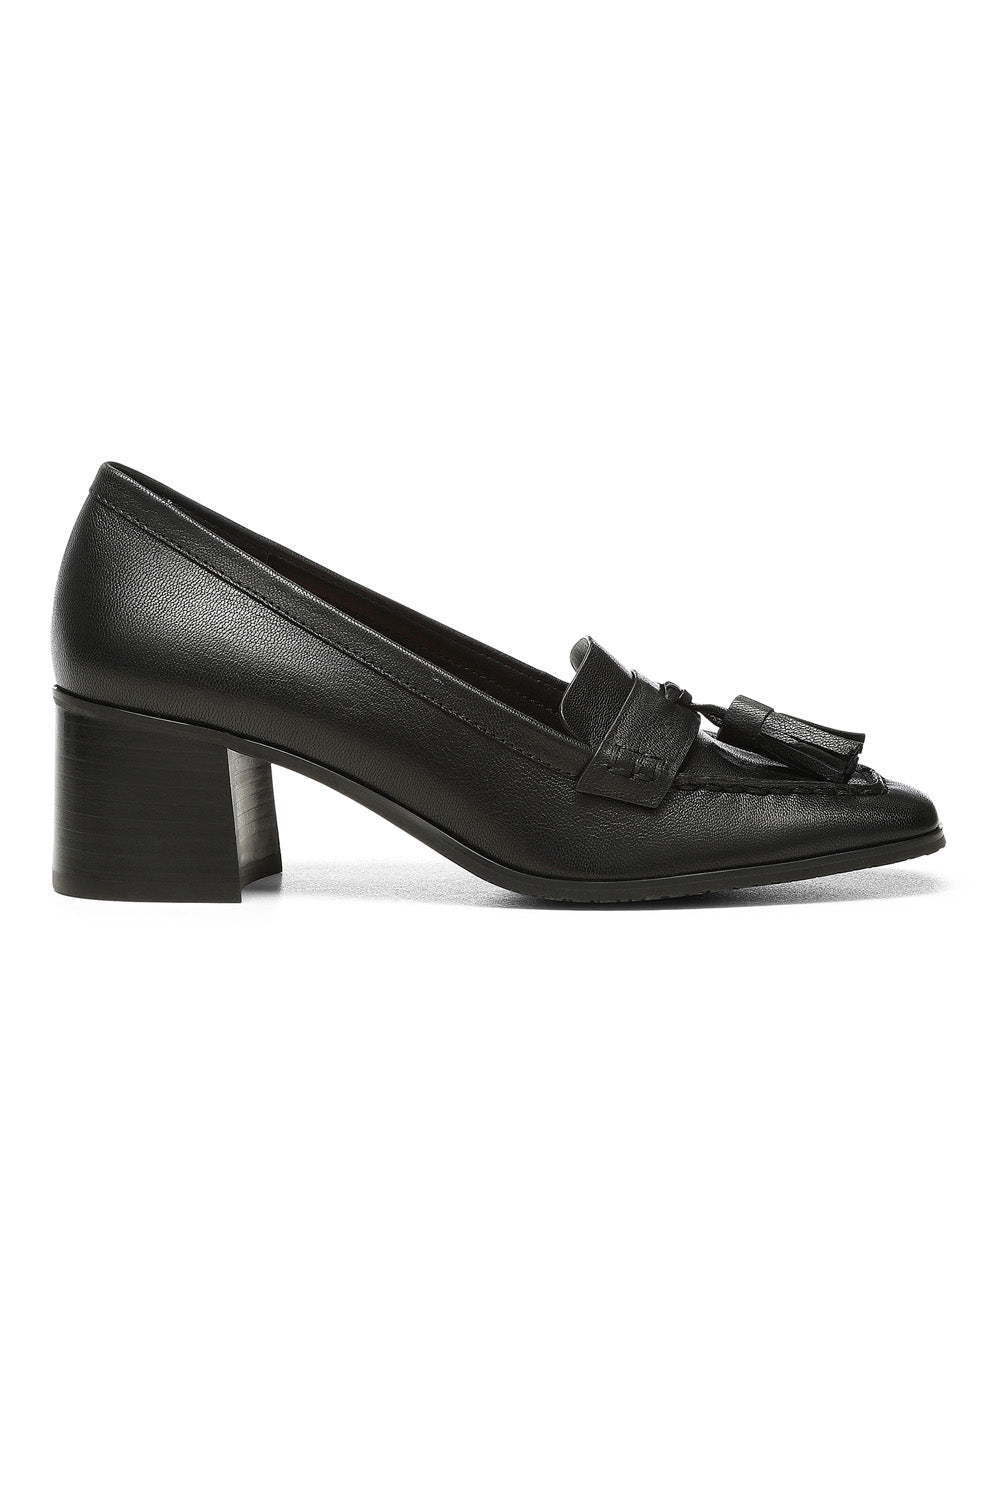 NYDJ Dexter Loafers In Leather - Black